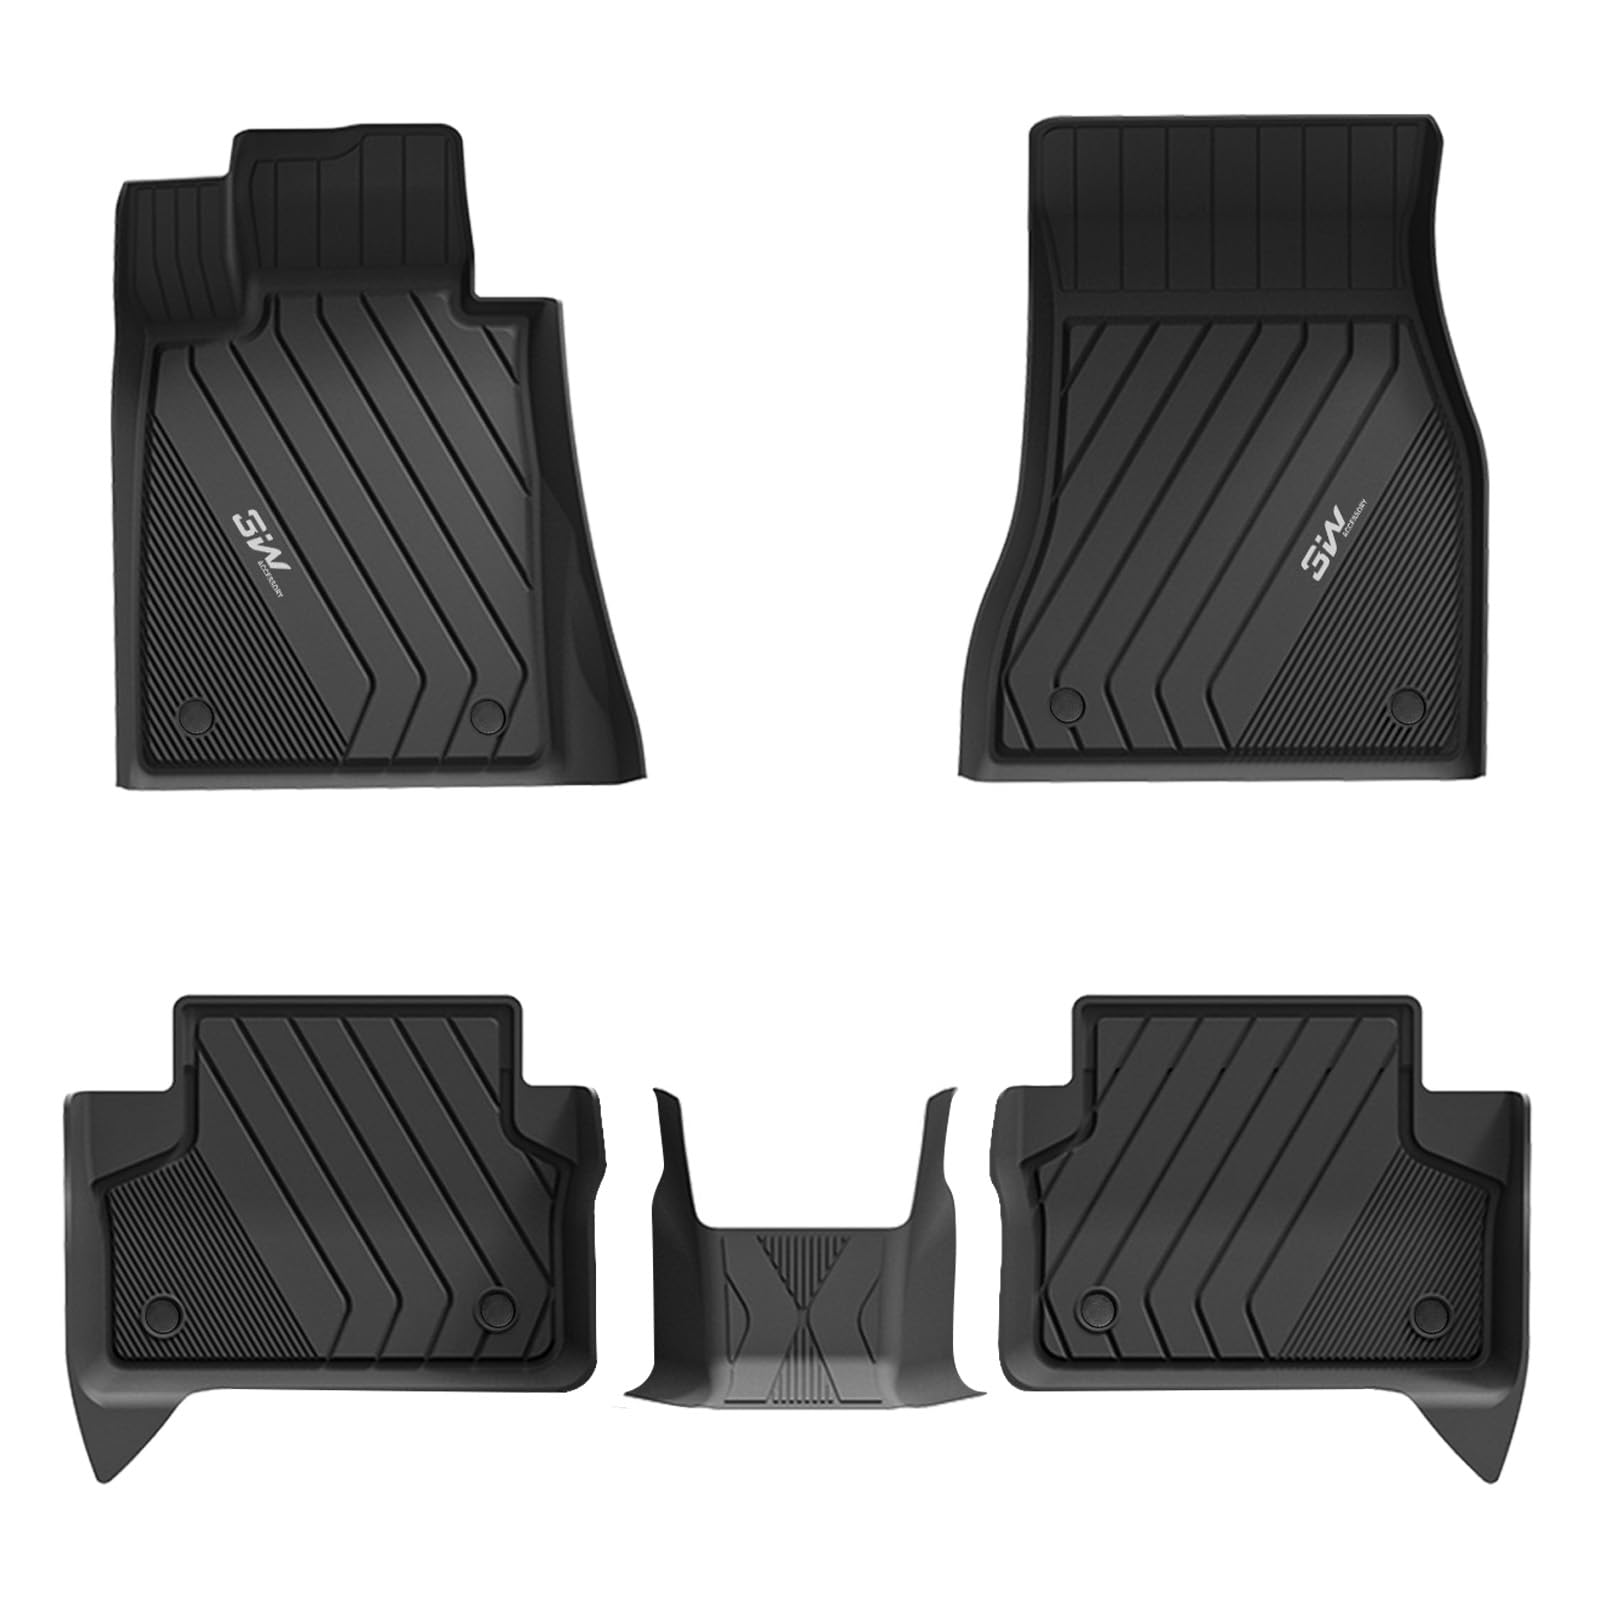 3W BMW 5 Series 2017-2023 G30 Custom Floor Mats Cargo Liner TPE Material & All-Weather Protection Vehicles & Parts 3Wliners 2017-2023 5 Series 2017-2023 1st&2nd Row Mats